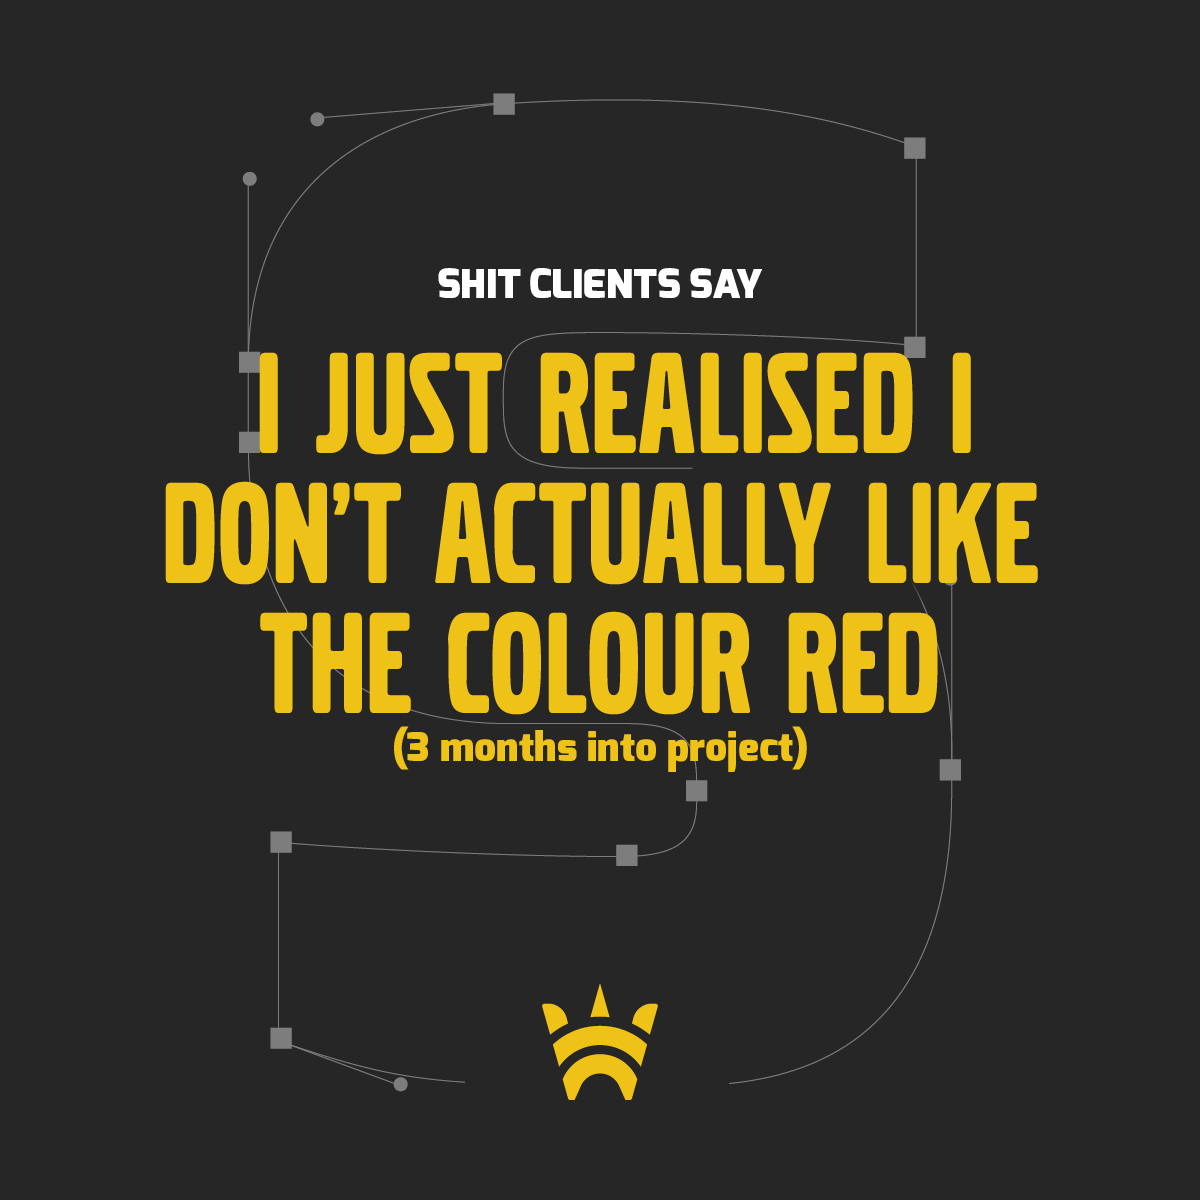 I just realised that I don't actually like the colour red